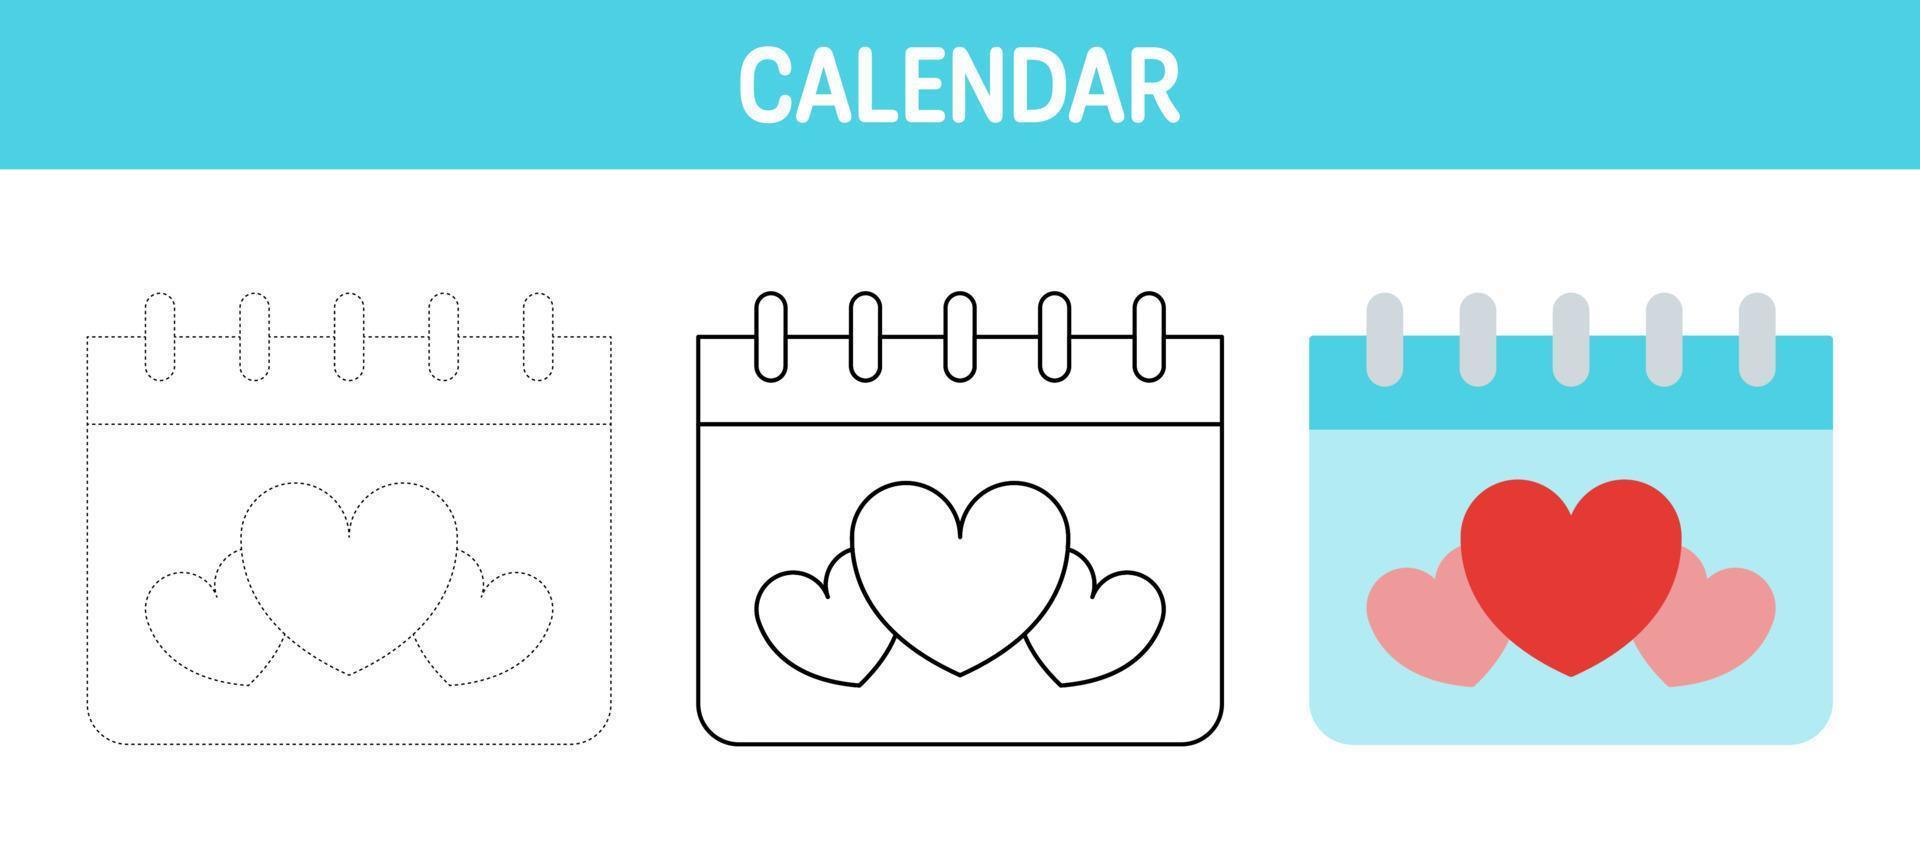 Calendar tracing and coloring worksheet for kids vector